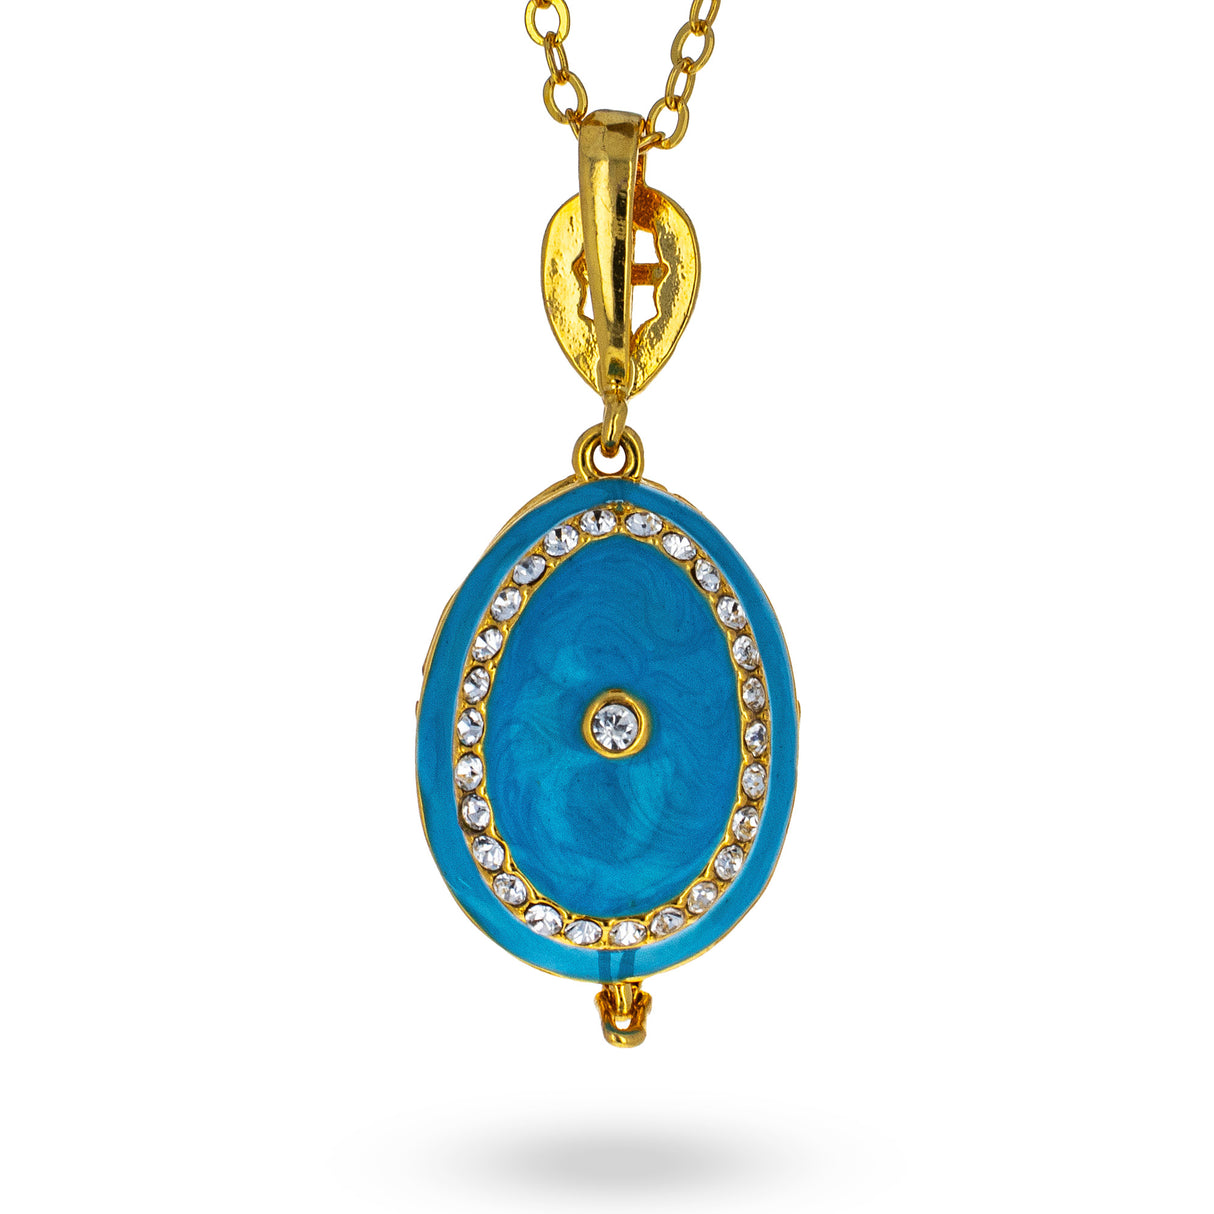 Shop Turquoise Brass 50 Crystals Triptych Icons Royal Egg Pendant Necklace. Buy Blue color Pewter Jewelry Necklaces Royal for Sale by Online Gift Shop BestPysanky